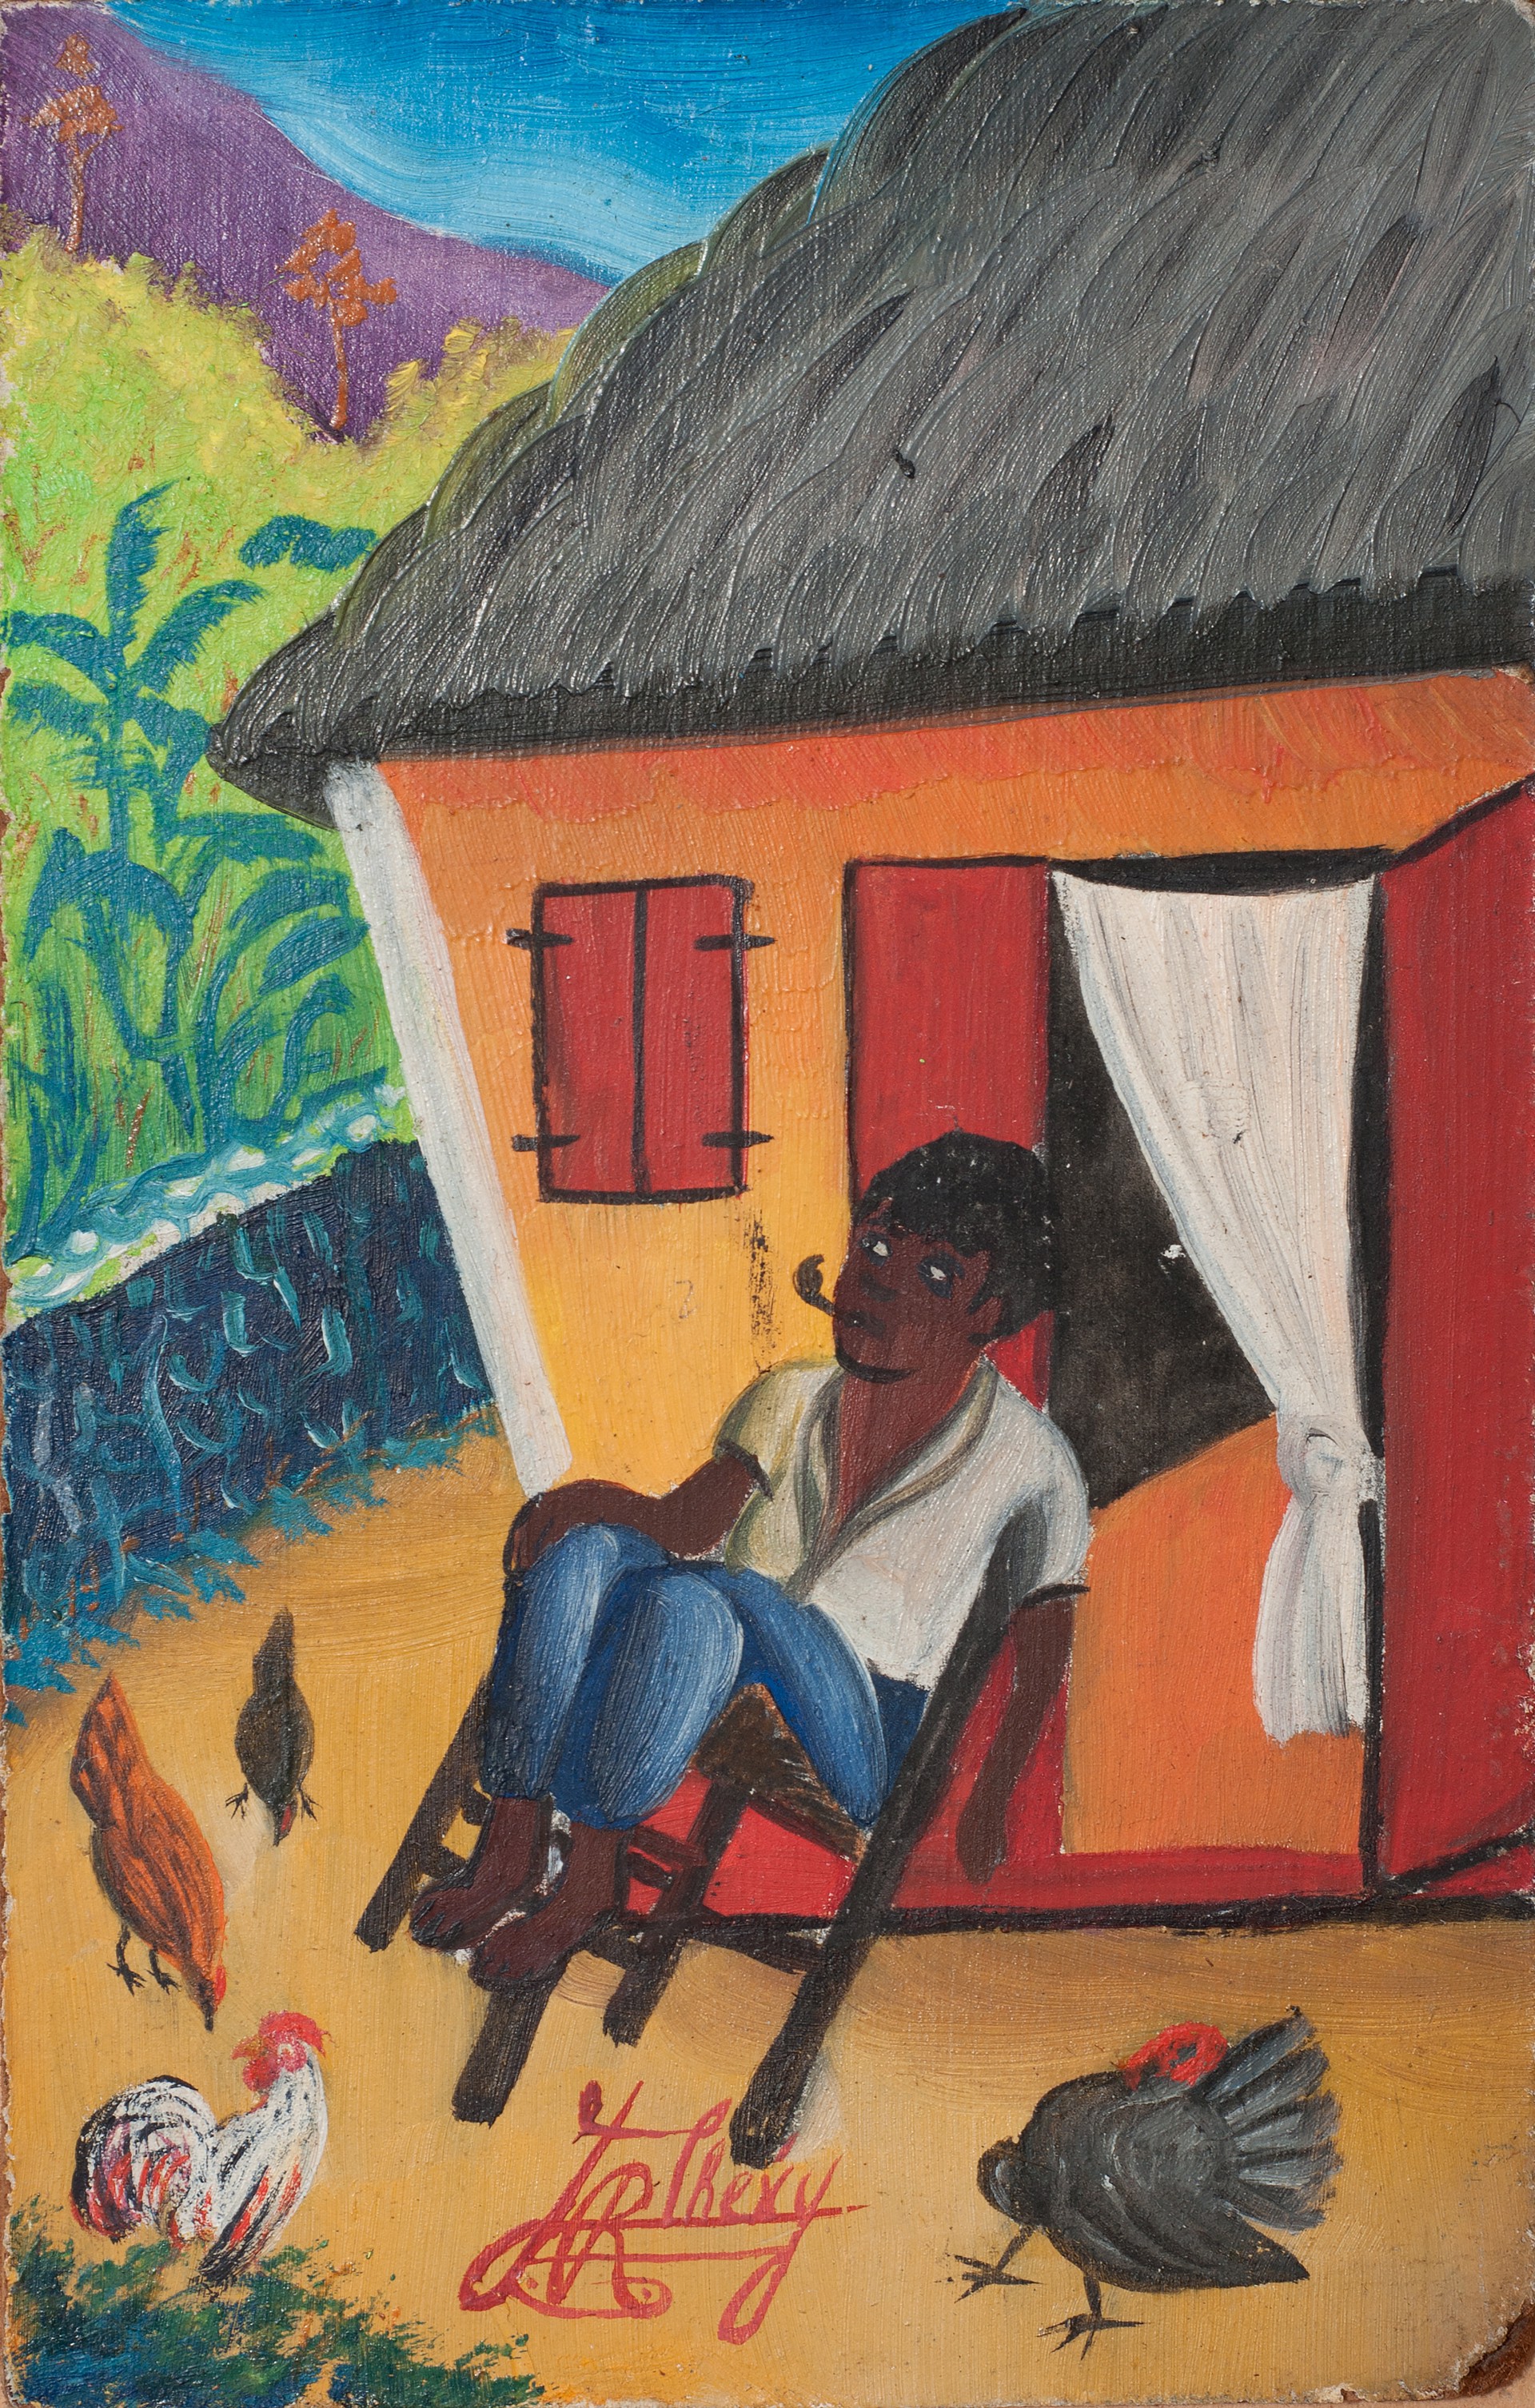 Sitting in the chair #28-1-93GSN by Jacques Richard Chery (Haitian, 1929-1980)